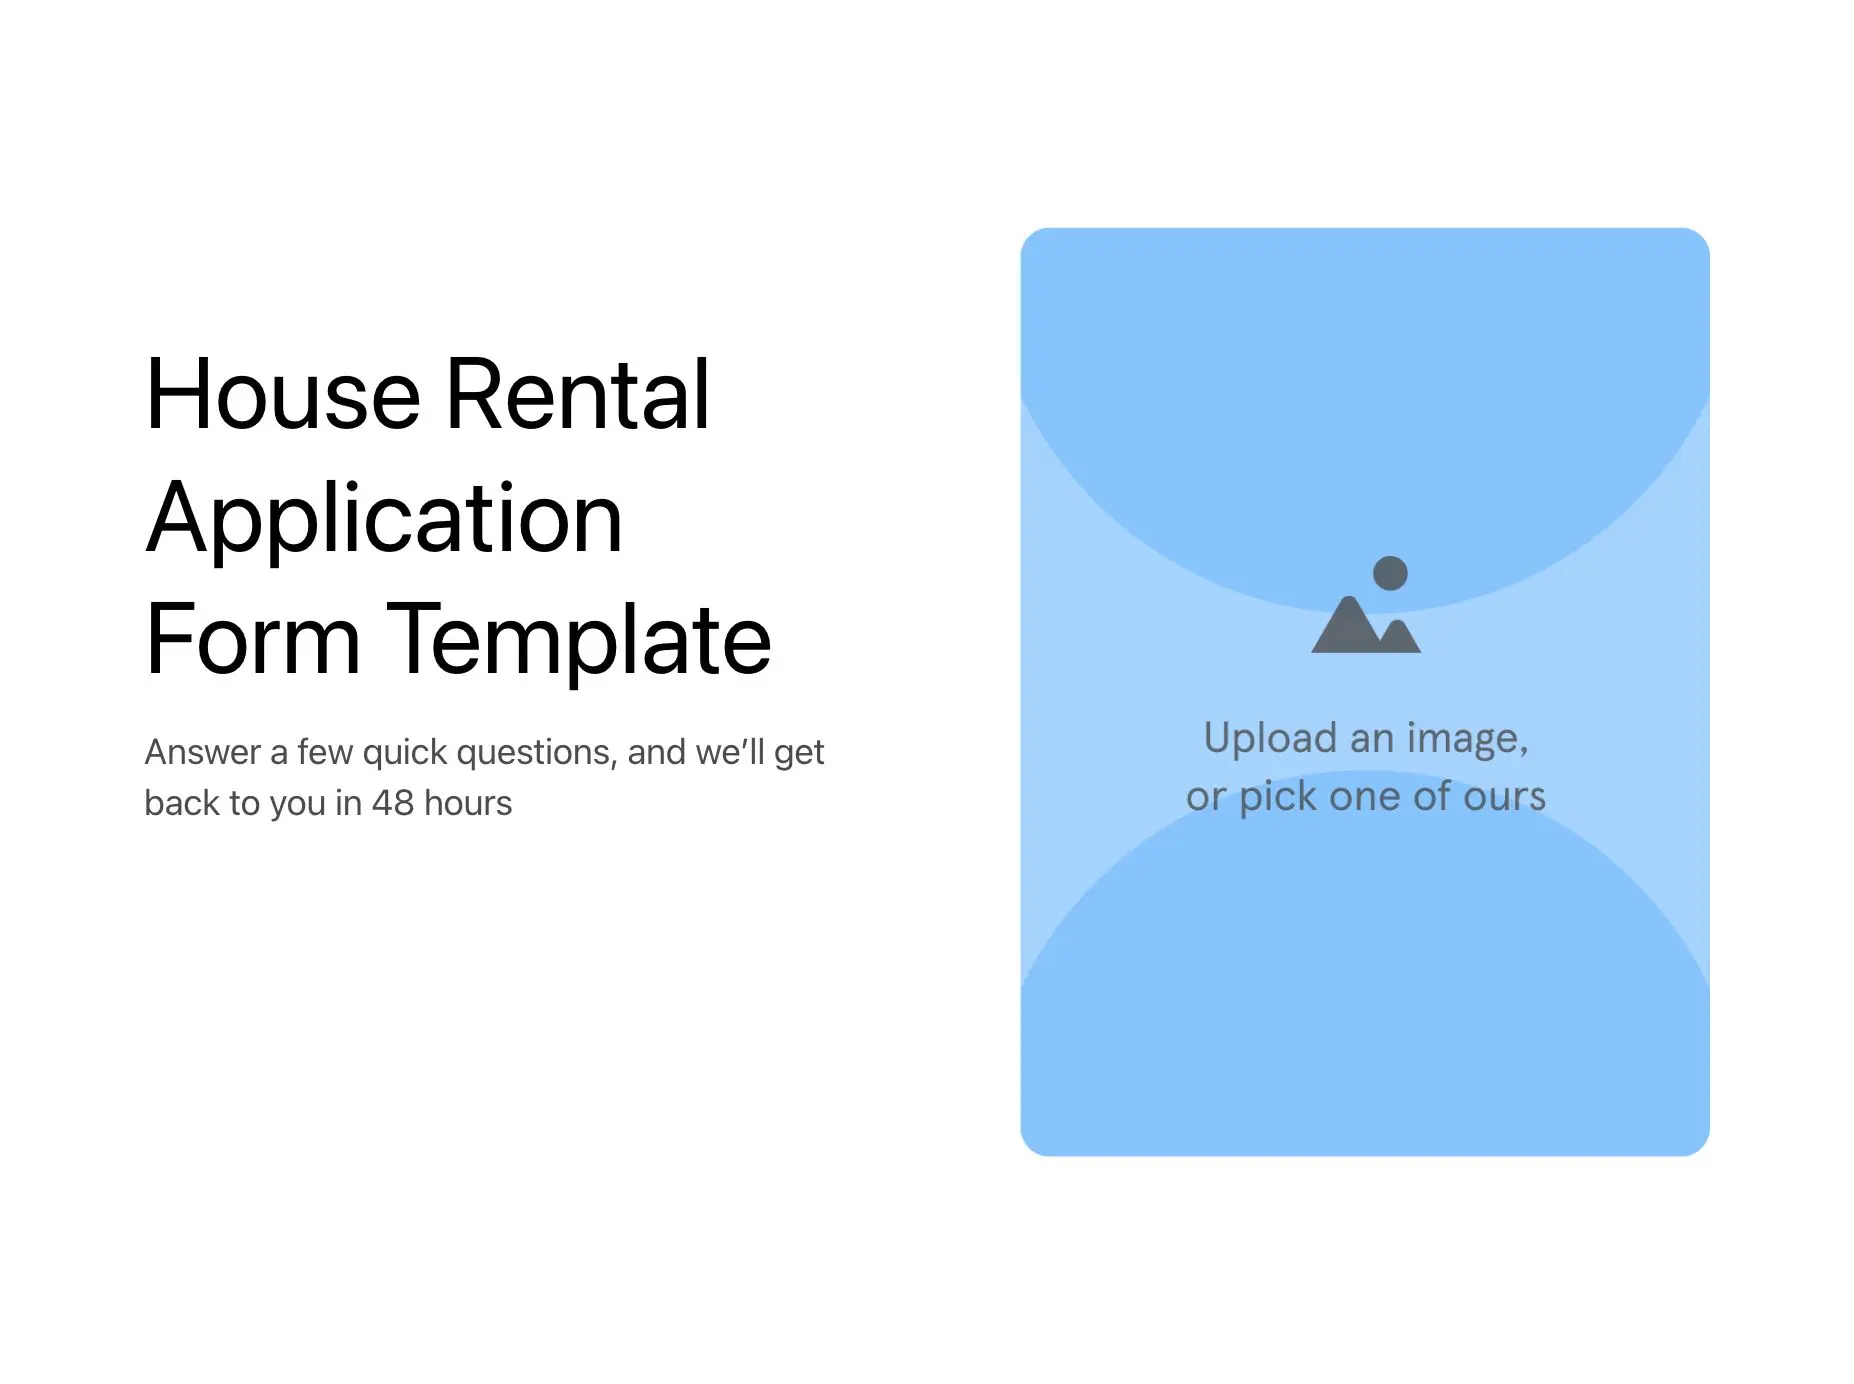 House Rental Application Form Template Hero